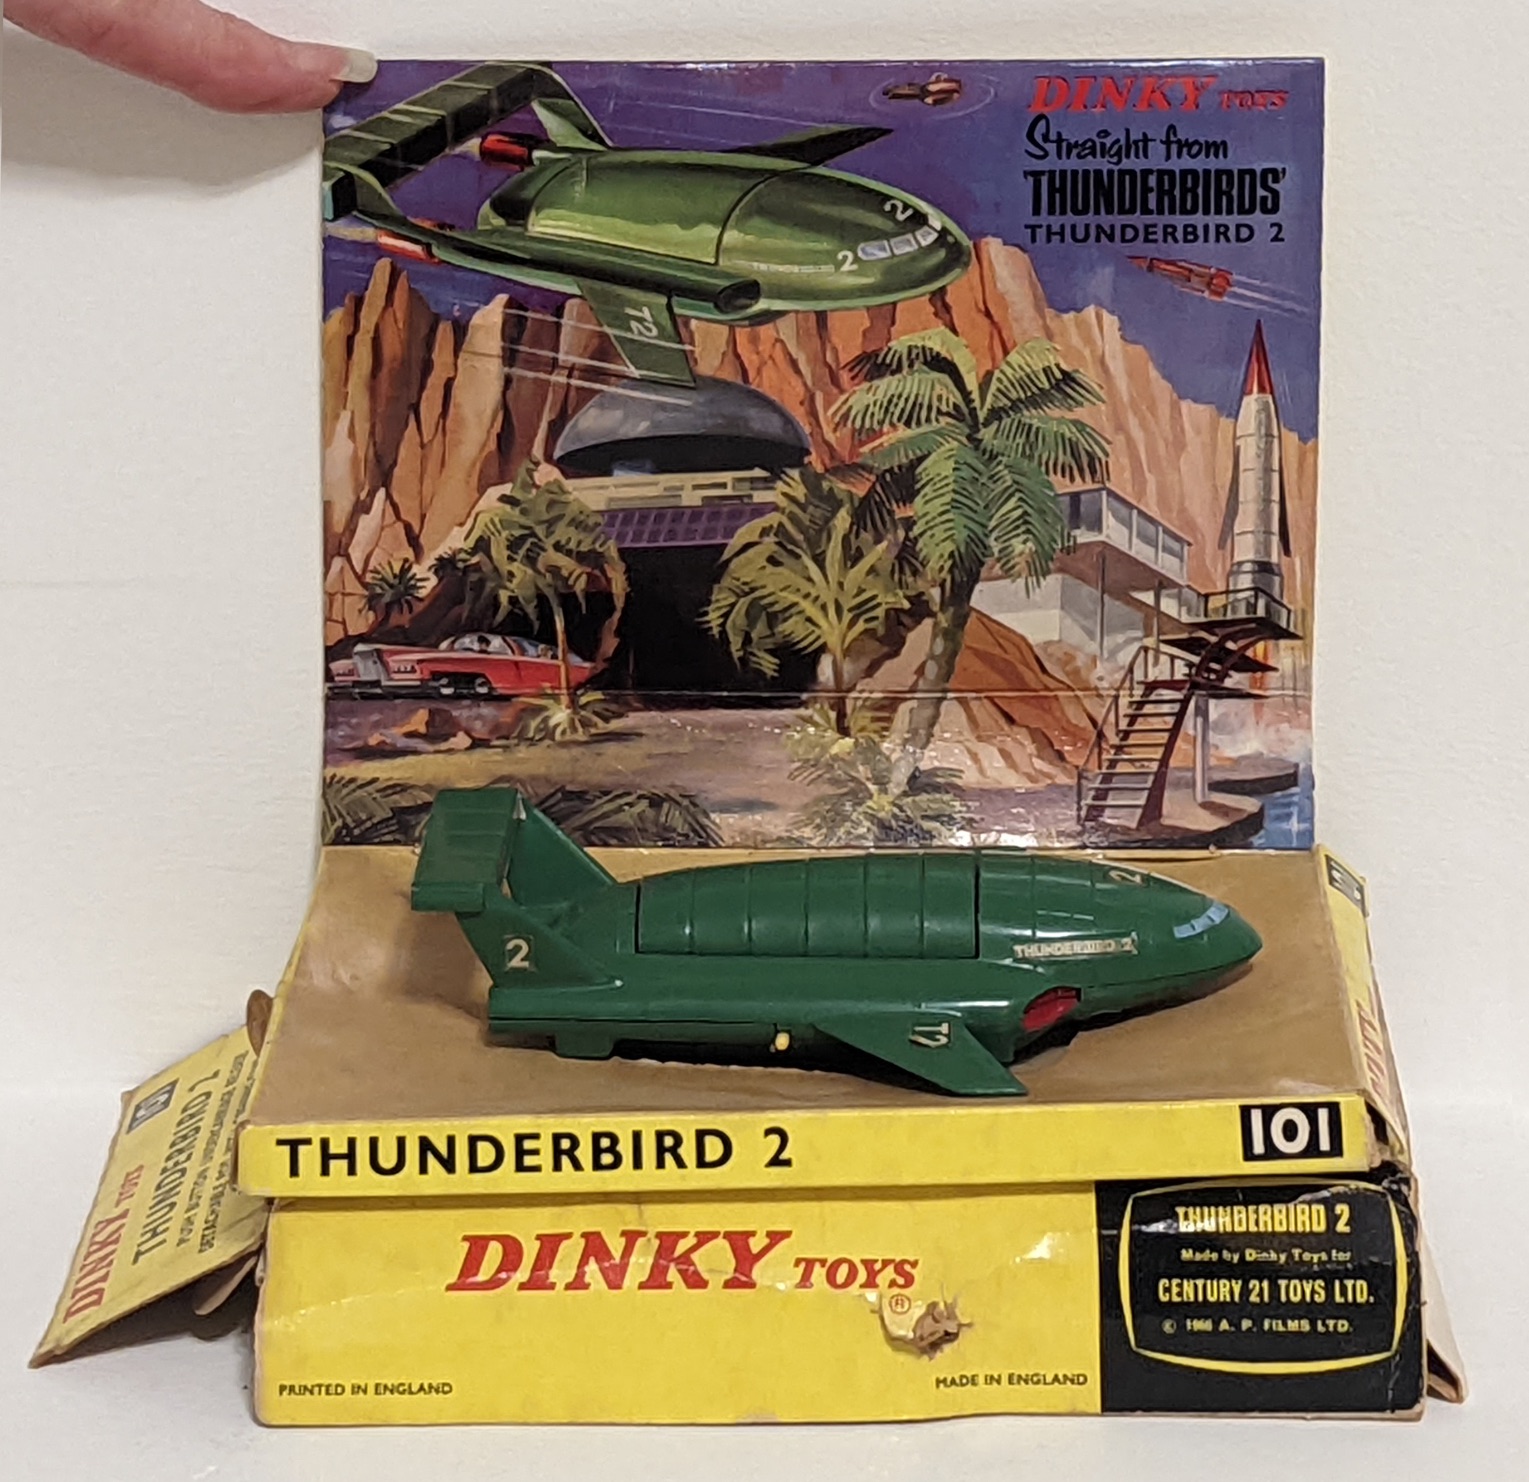 Dinky Toys No.101 Thunderbird 2, comprising of green body with four yellow plastic legs and red rear - Image 2 of 3